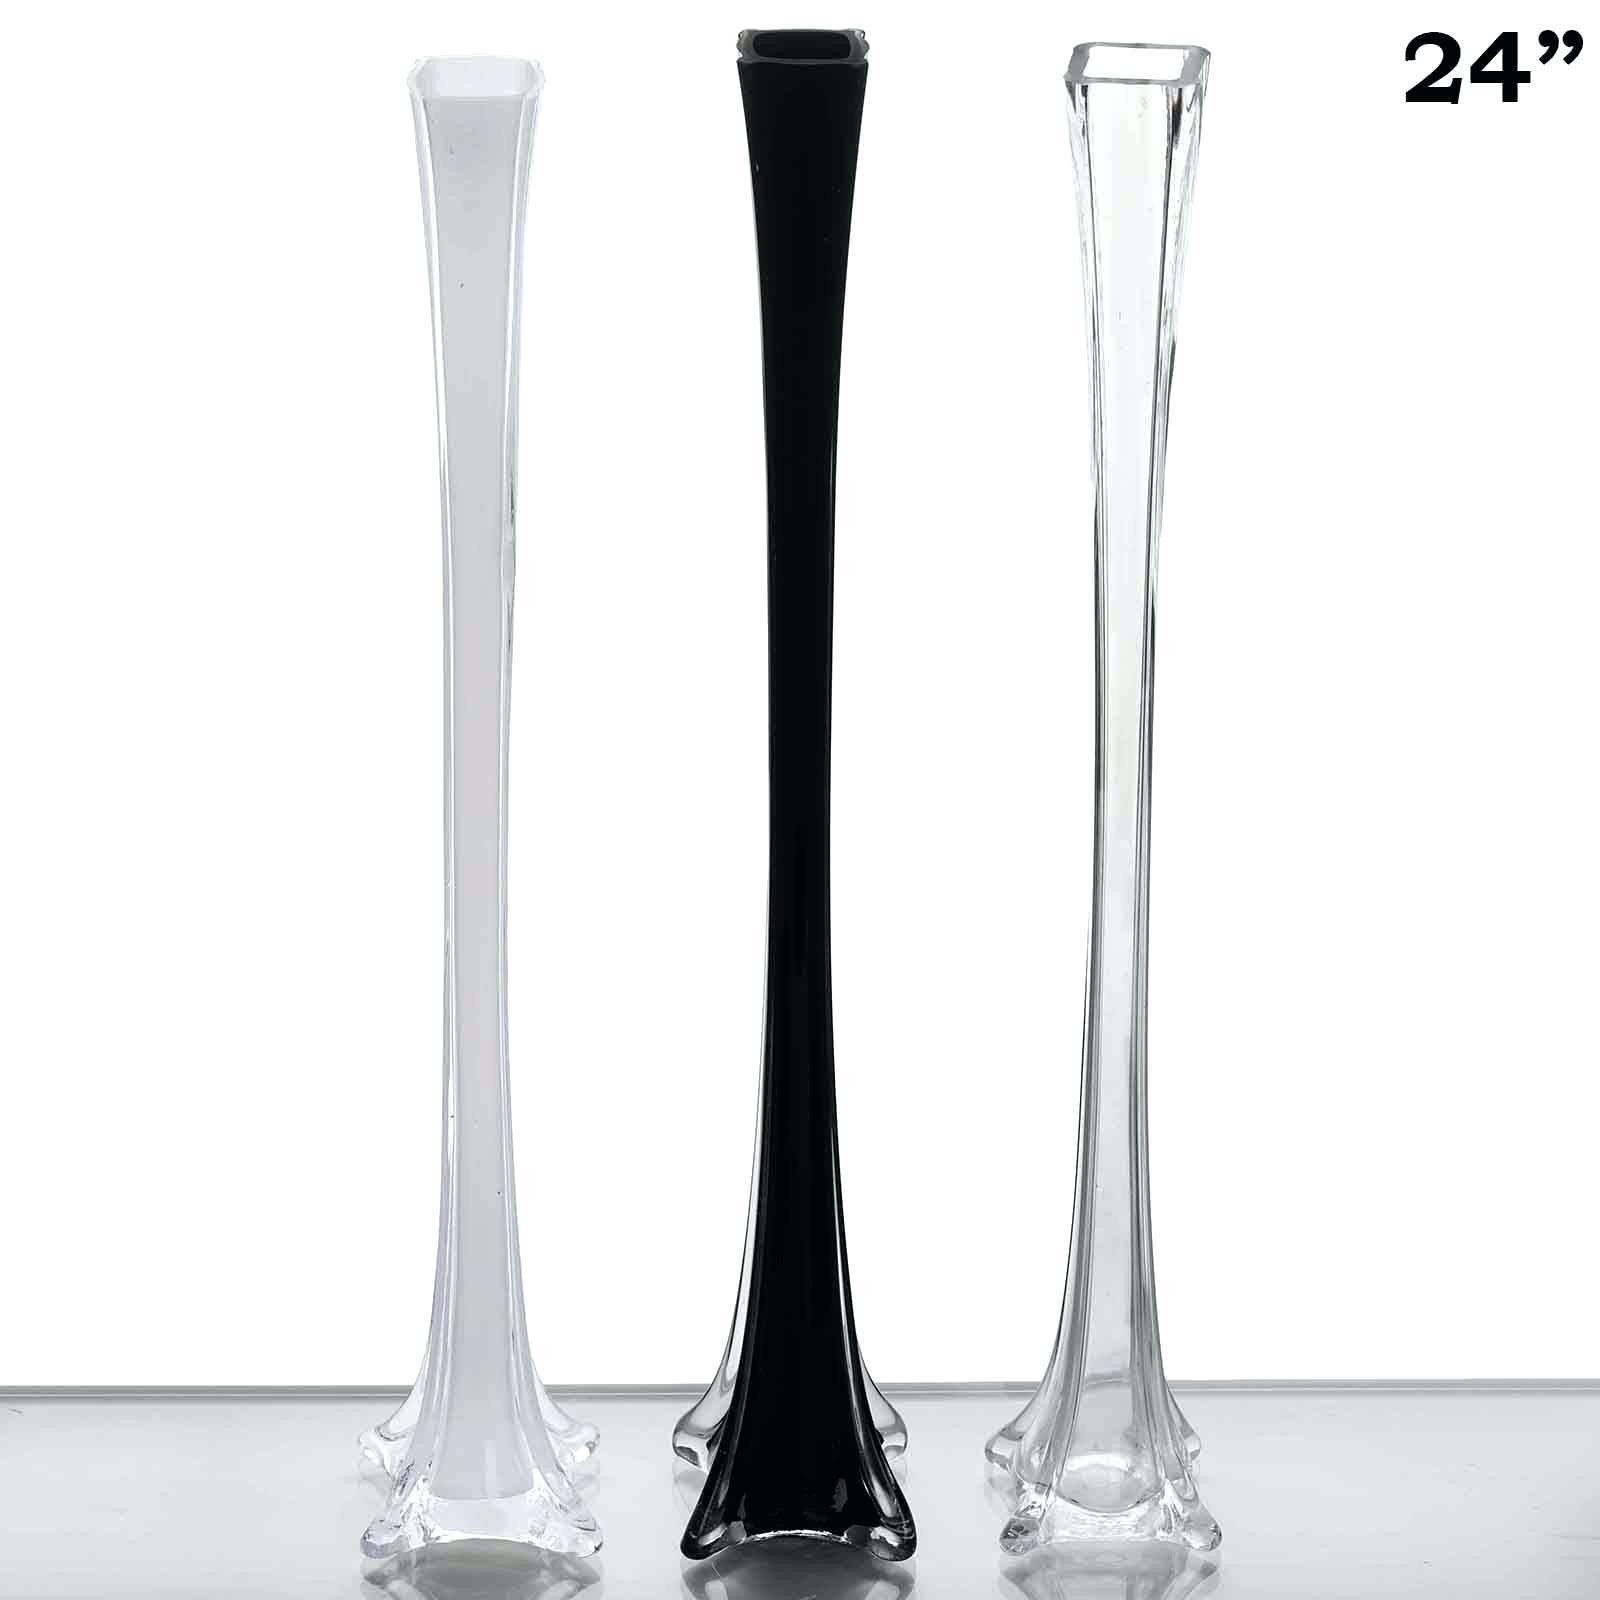 23 Ideal 20 Cylinder Vase wholesale 2024 free download 20 cylinder vase wholesale of black glass vases stock fantastic chair decor ideas from living room in black glass vases stock fantastic chair decor ideas from living room vases wholesale awe